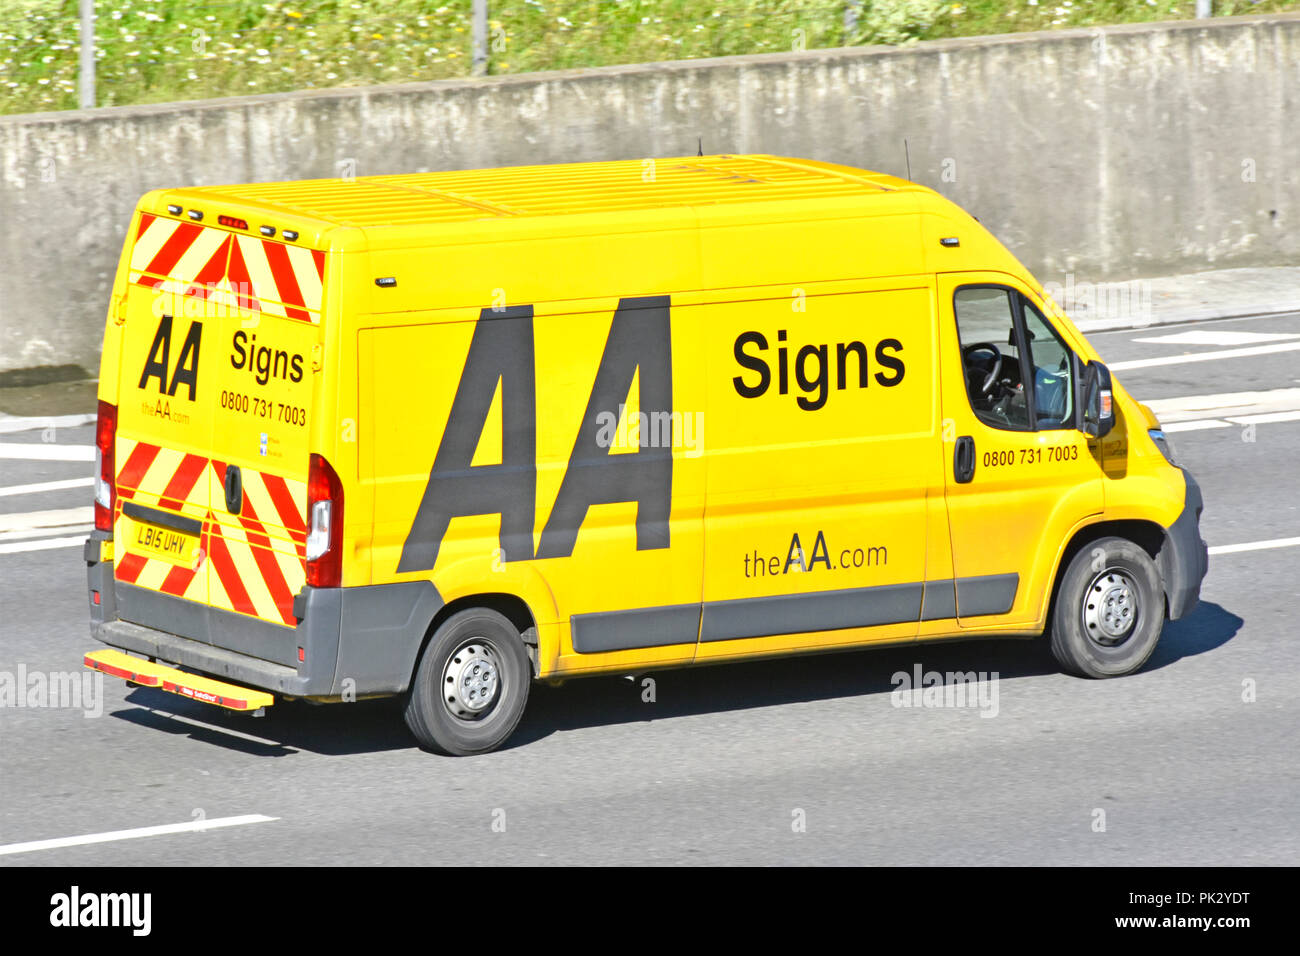 AA Automobile Association yellow van driving on UK motorway that deals with erection dismantling of temporary road & event signs to assist motorists Stock Photo